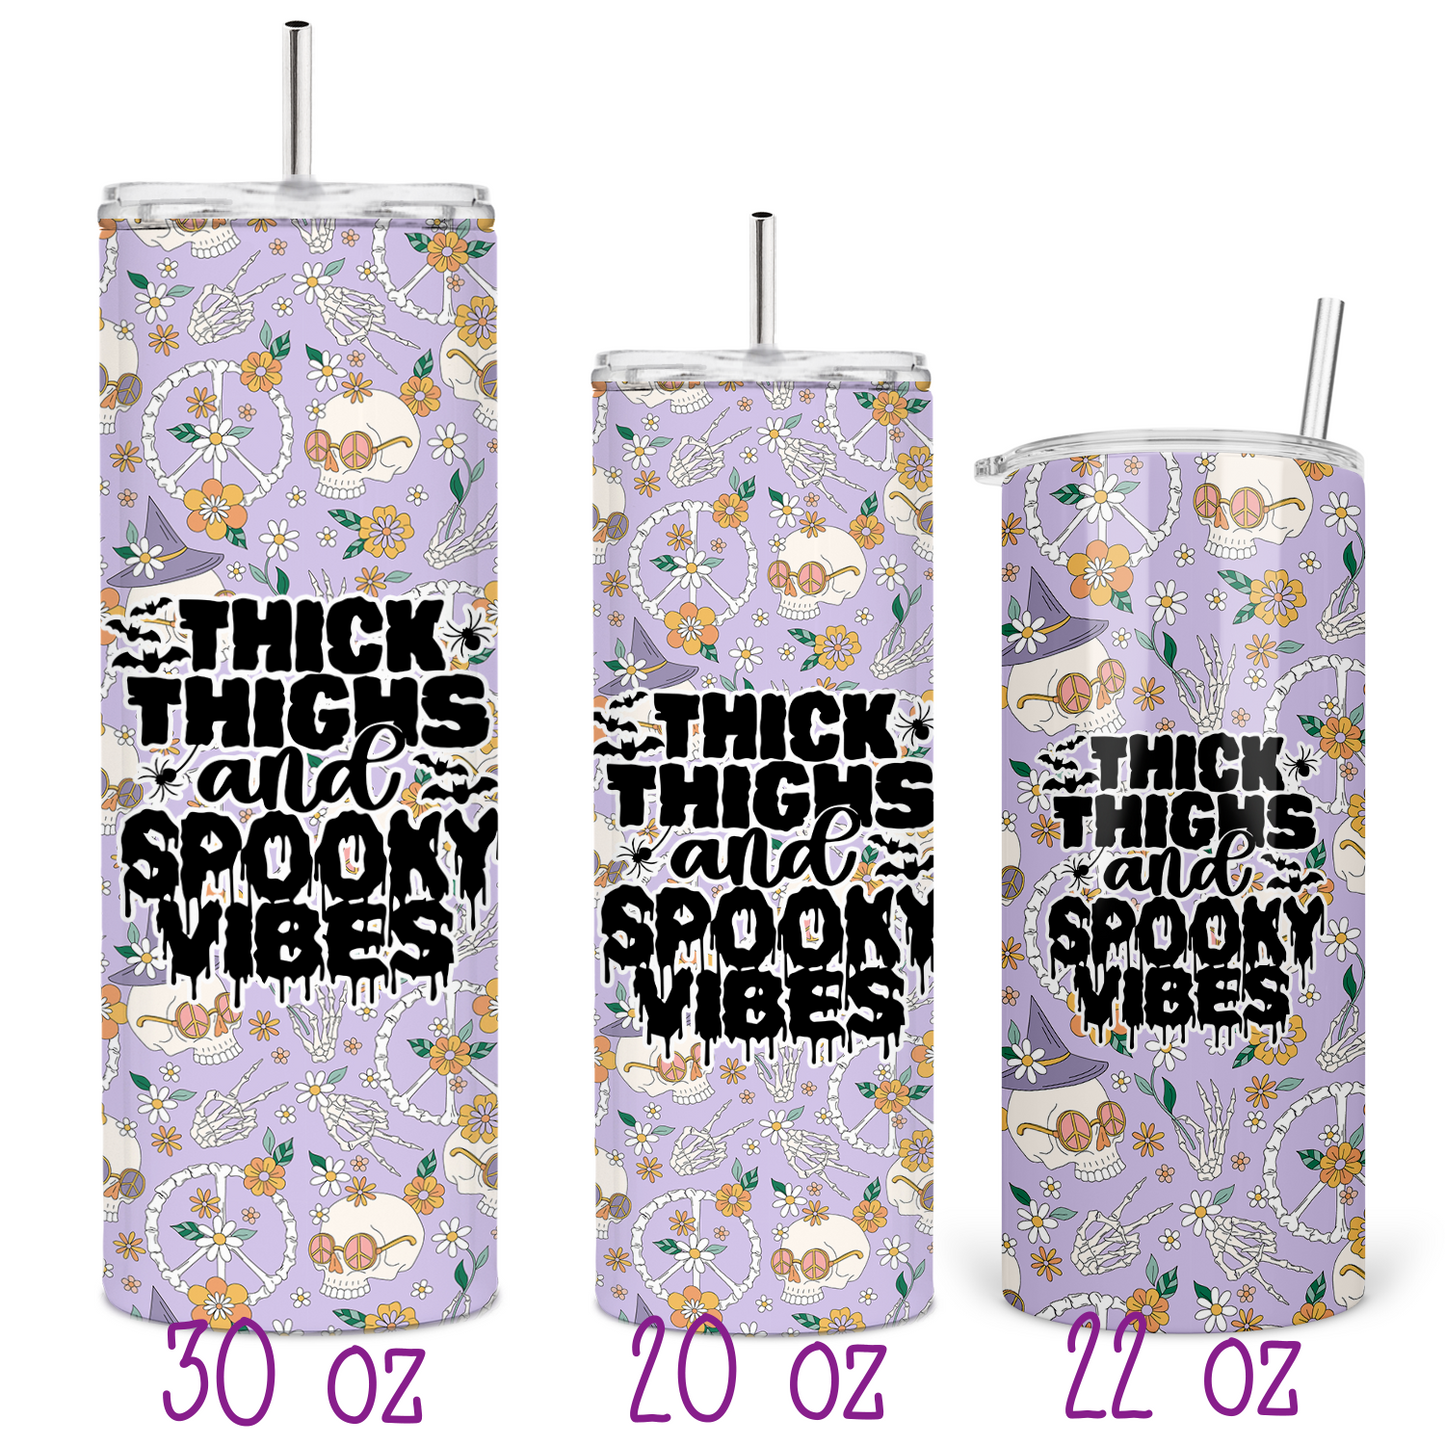 Thick Thighs and Spooky Vibes Skinny Tumbler